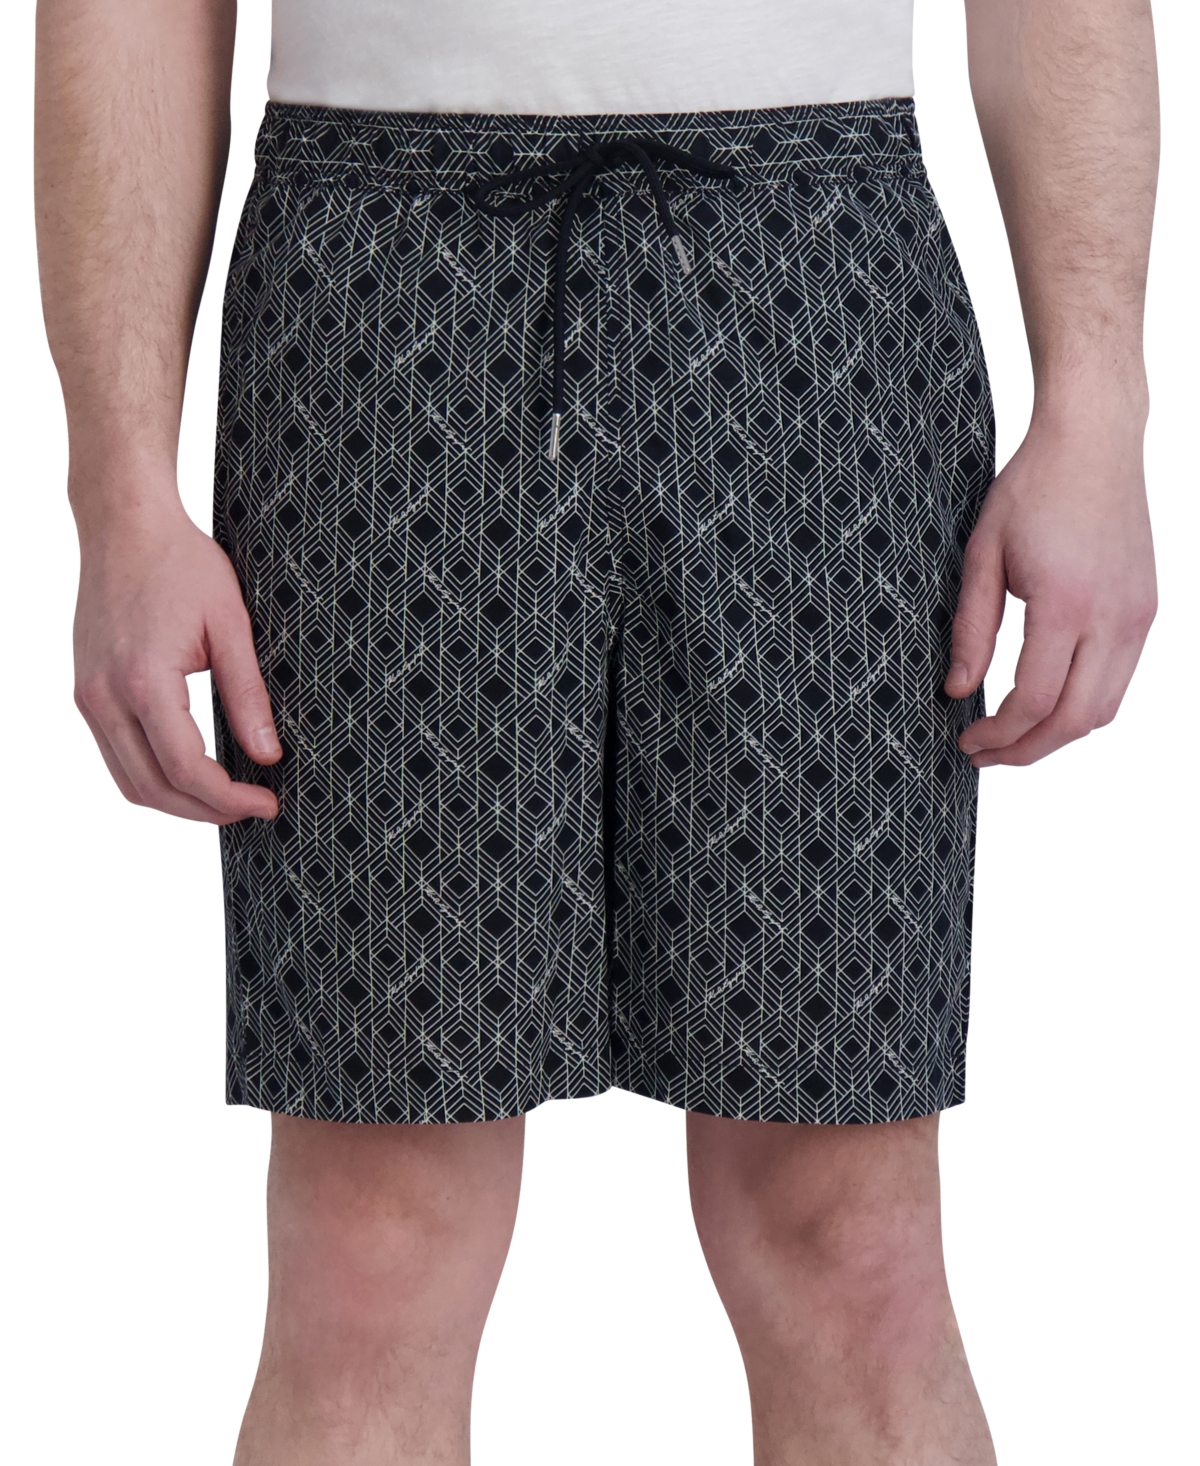 Men's Woven Geometric Shorts, Created for Macy's - Blk/wht